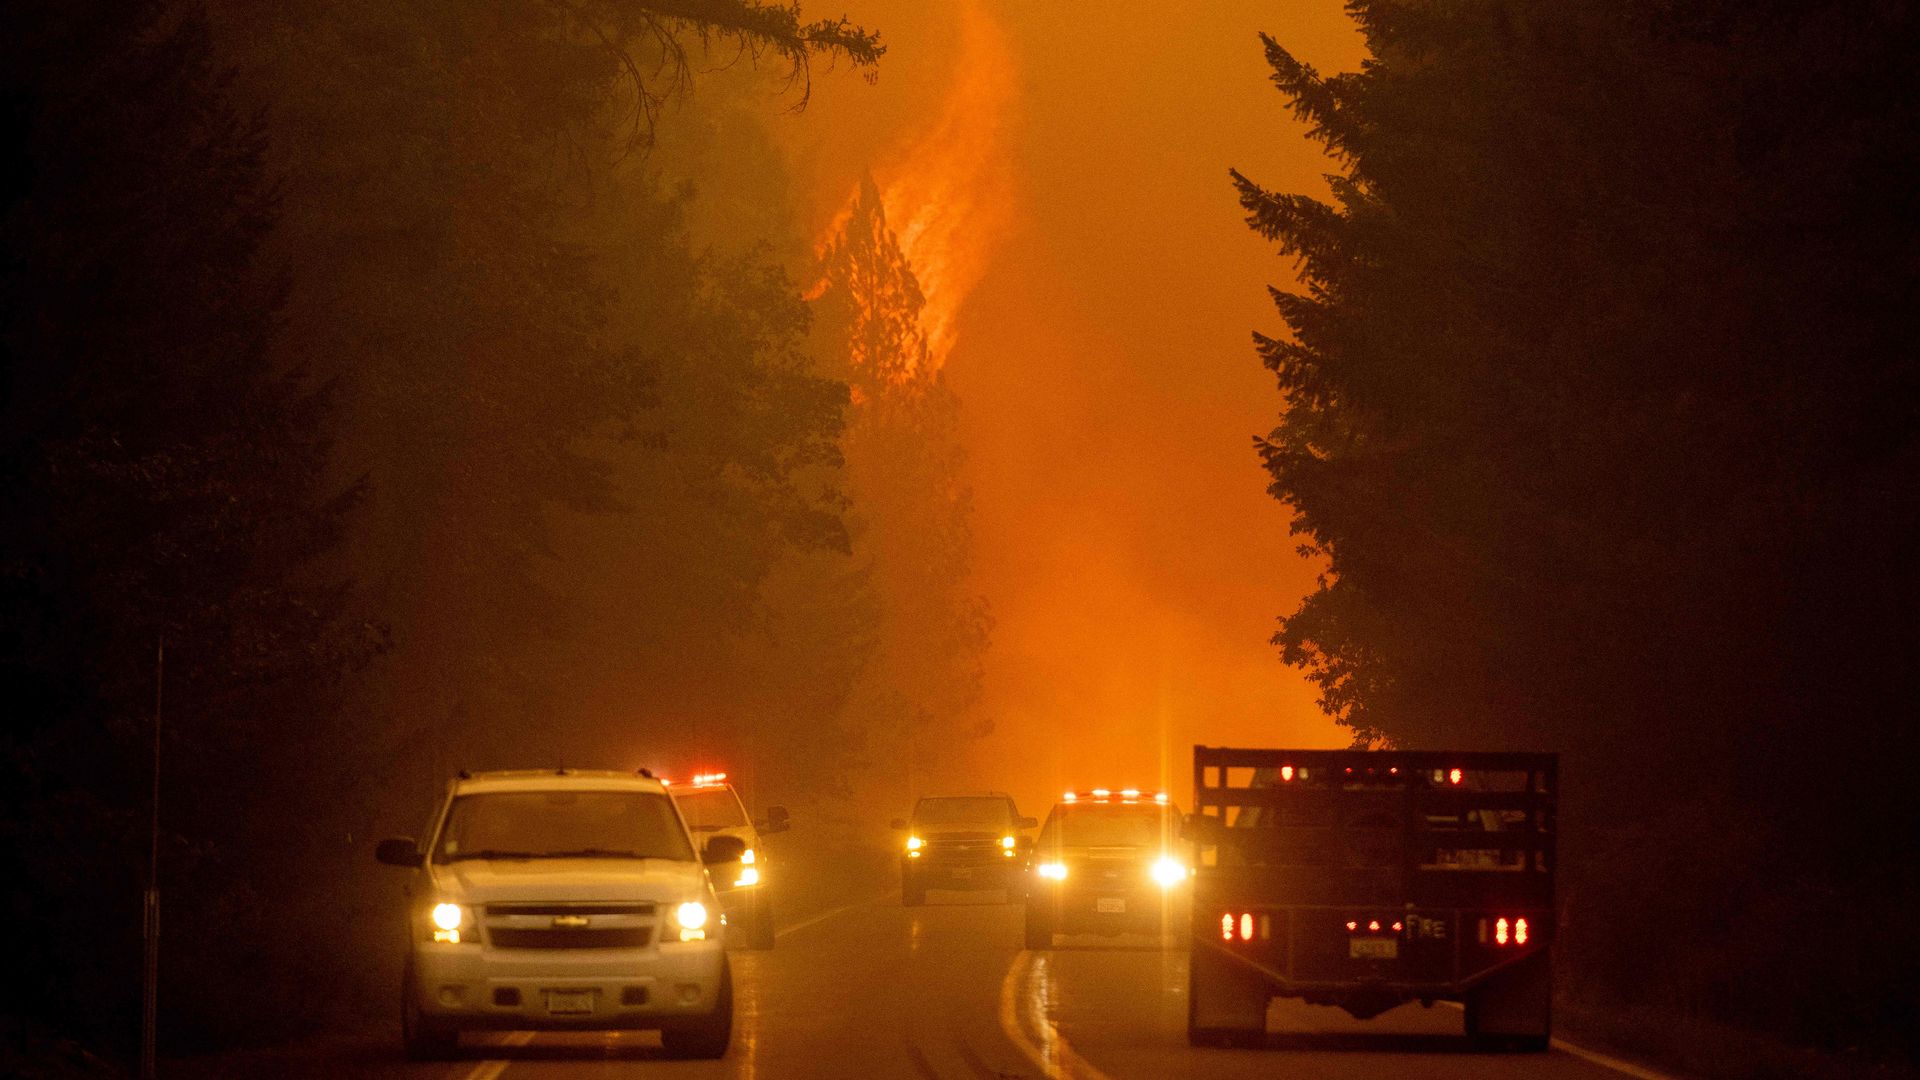  Firefighters monitor the scene as flames from the Dixie fire jump across highway 89 near Greenville, California on August 3